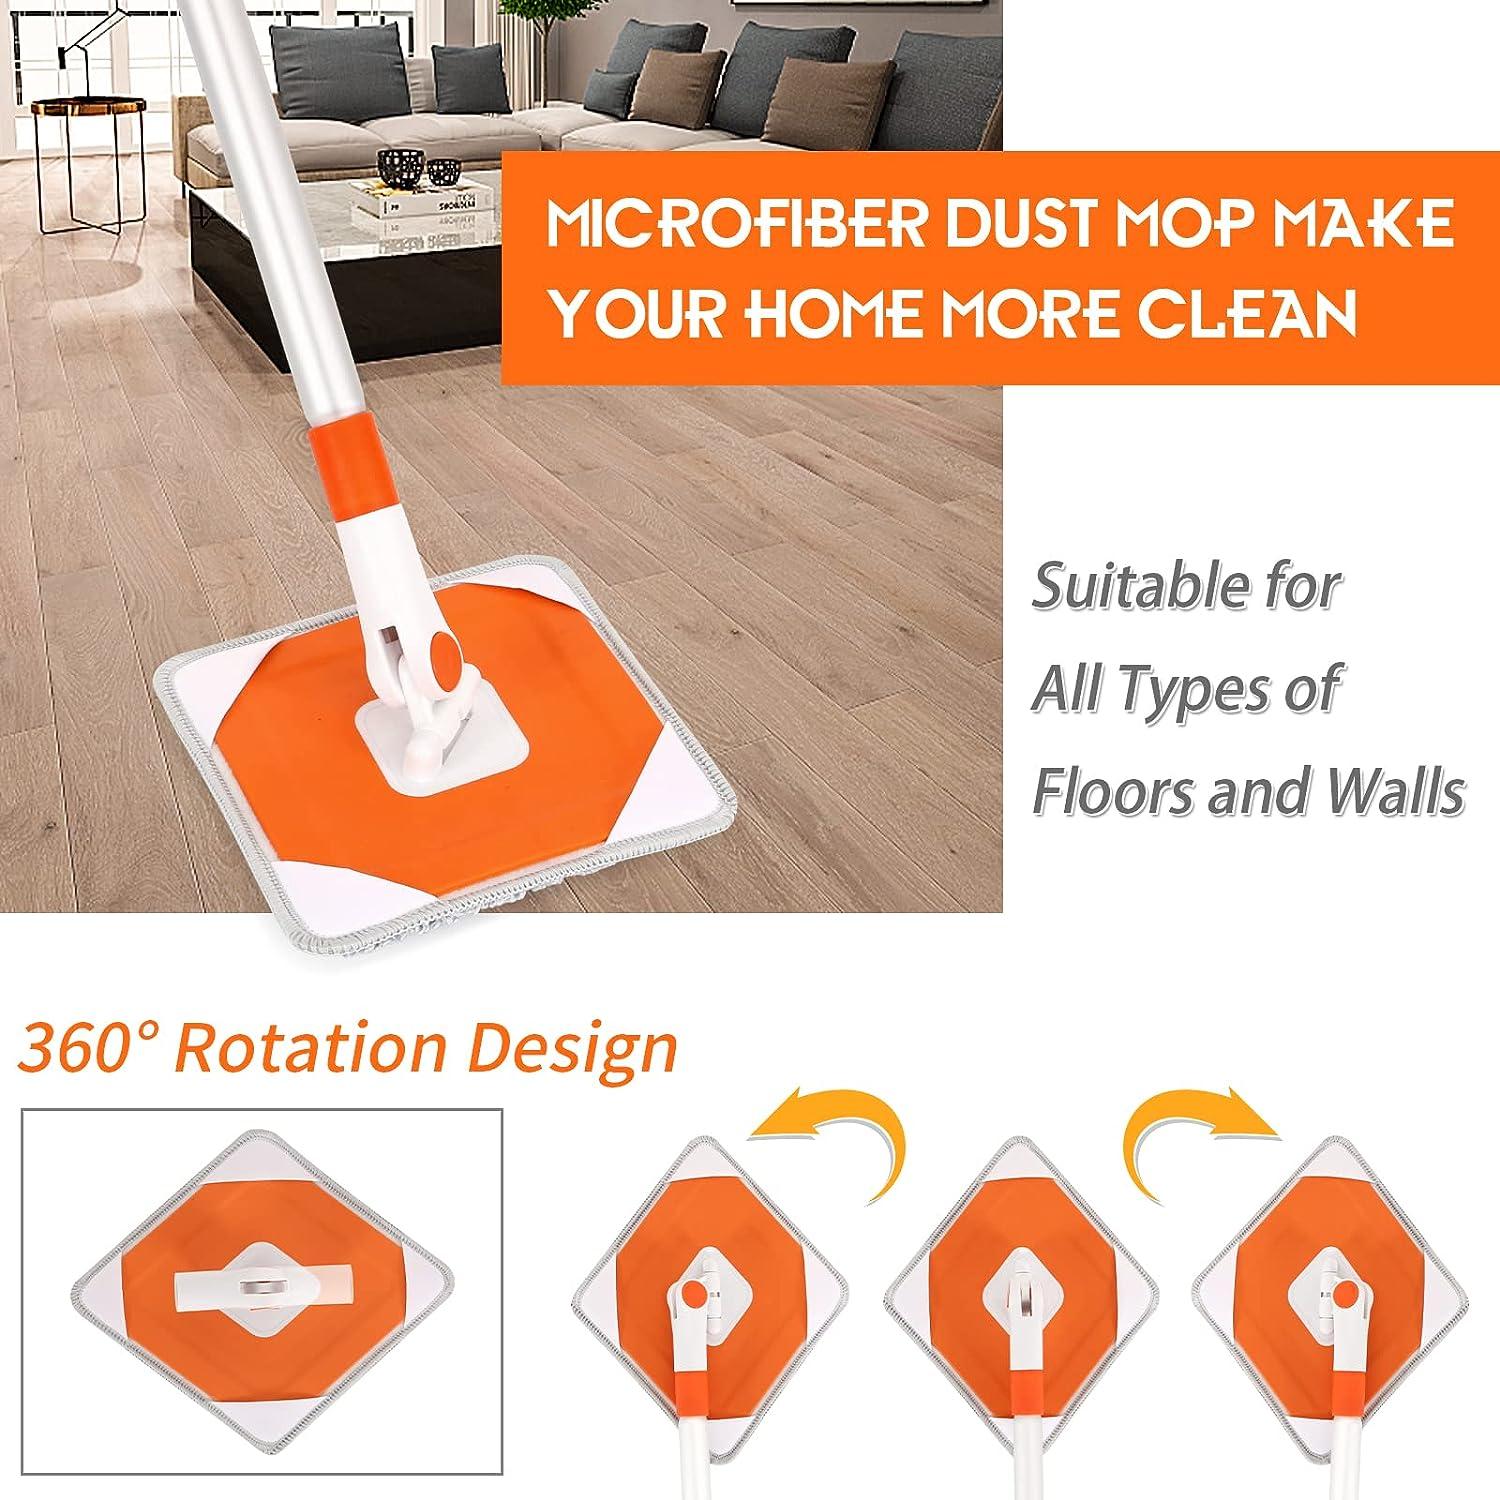 Baseboard Cleaner Tool with Handle Reusable Mop Cleaning Pad with